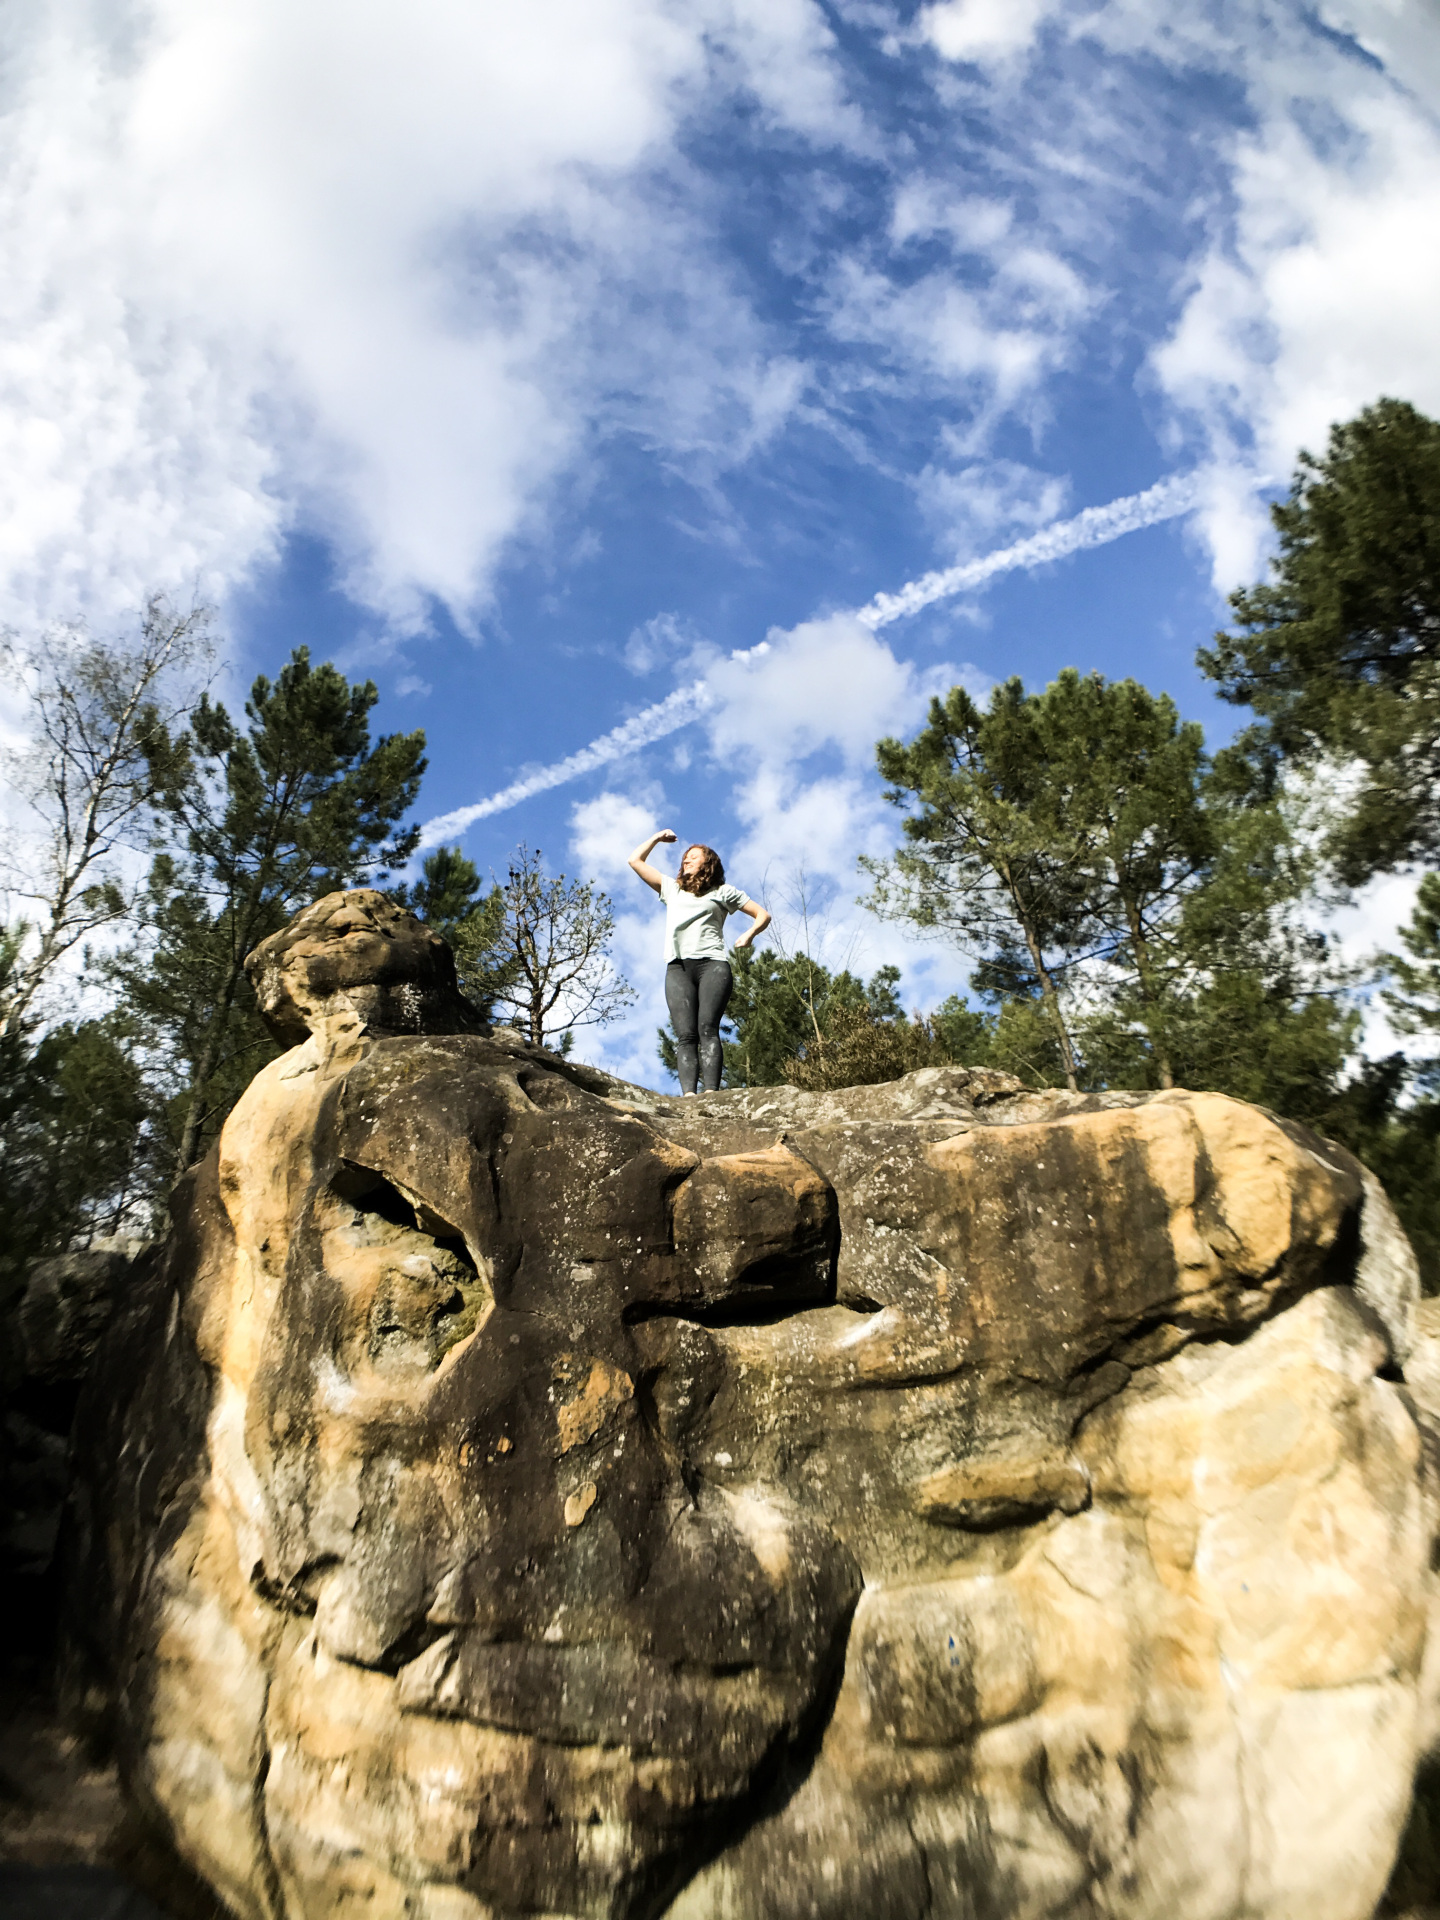 Me (Lashara) at the top of a boulder in FONTAINEBLEAU FOREST IN FRANCE